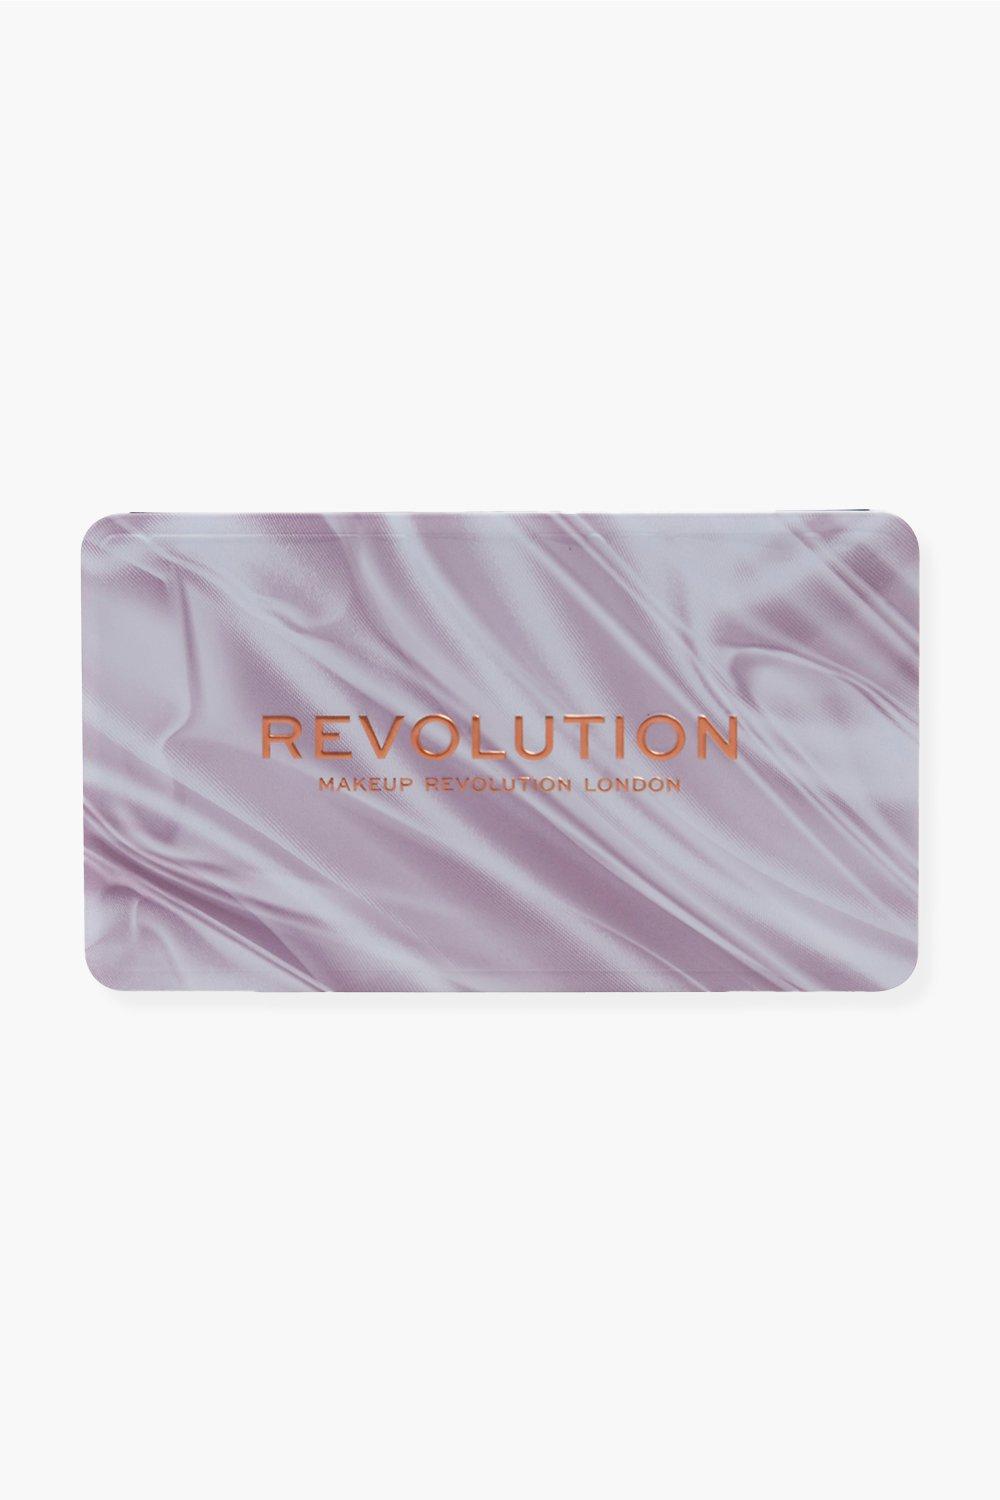 Revolution Forever Flawless Shadow Palette Nude Silk